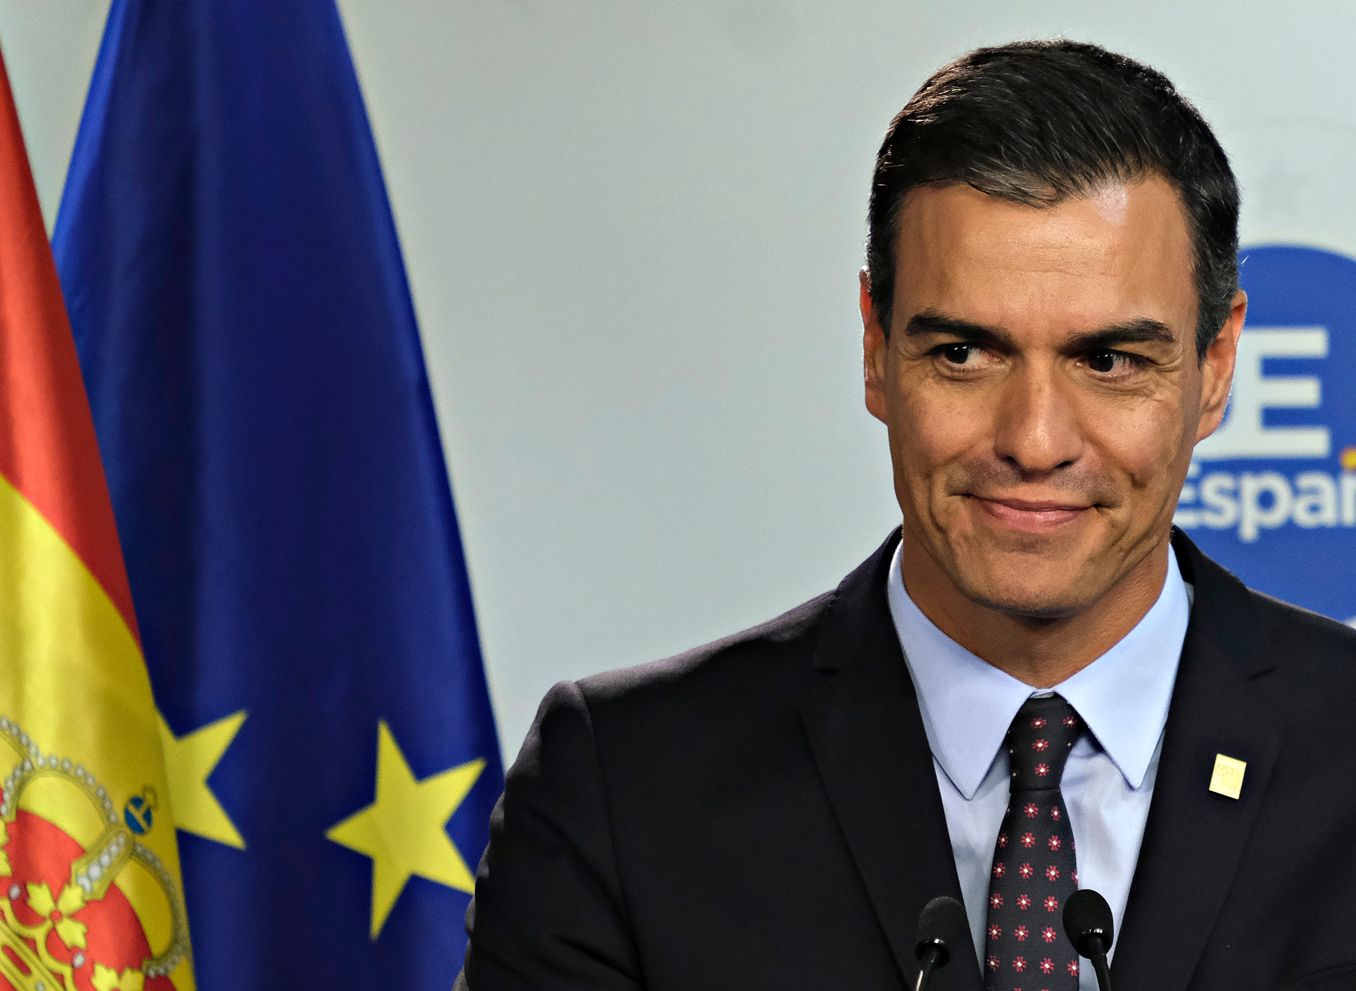 Pedro Sánchez: - This Government puts feminism and equality at the centre